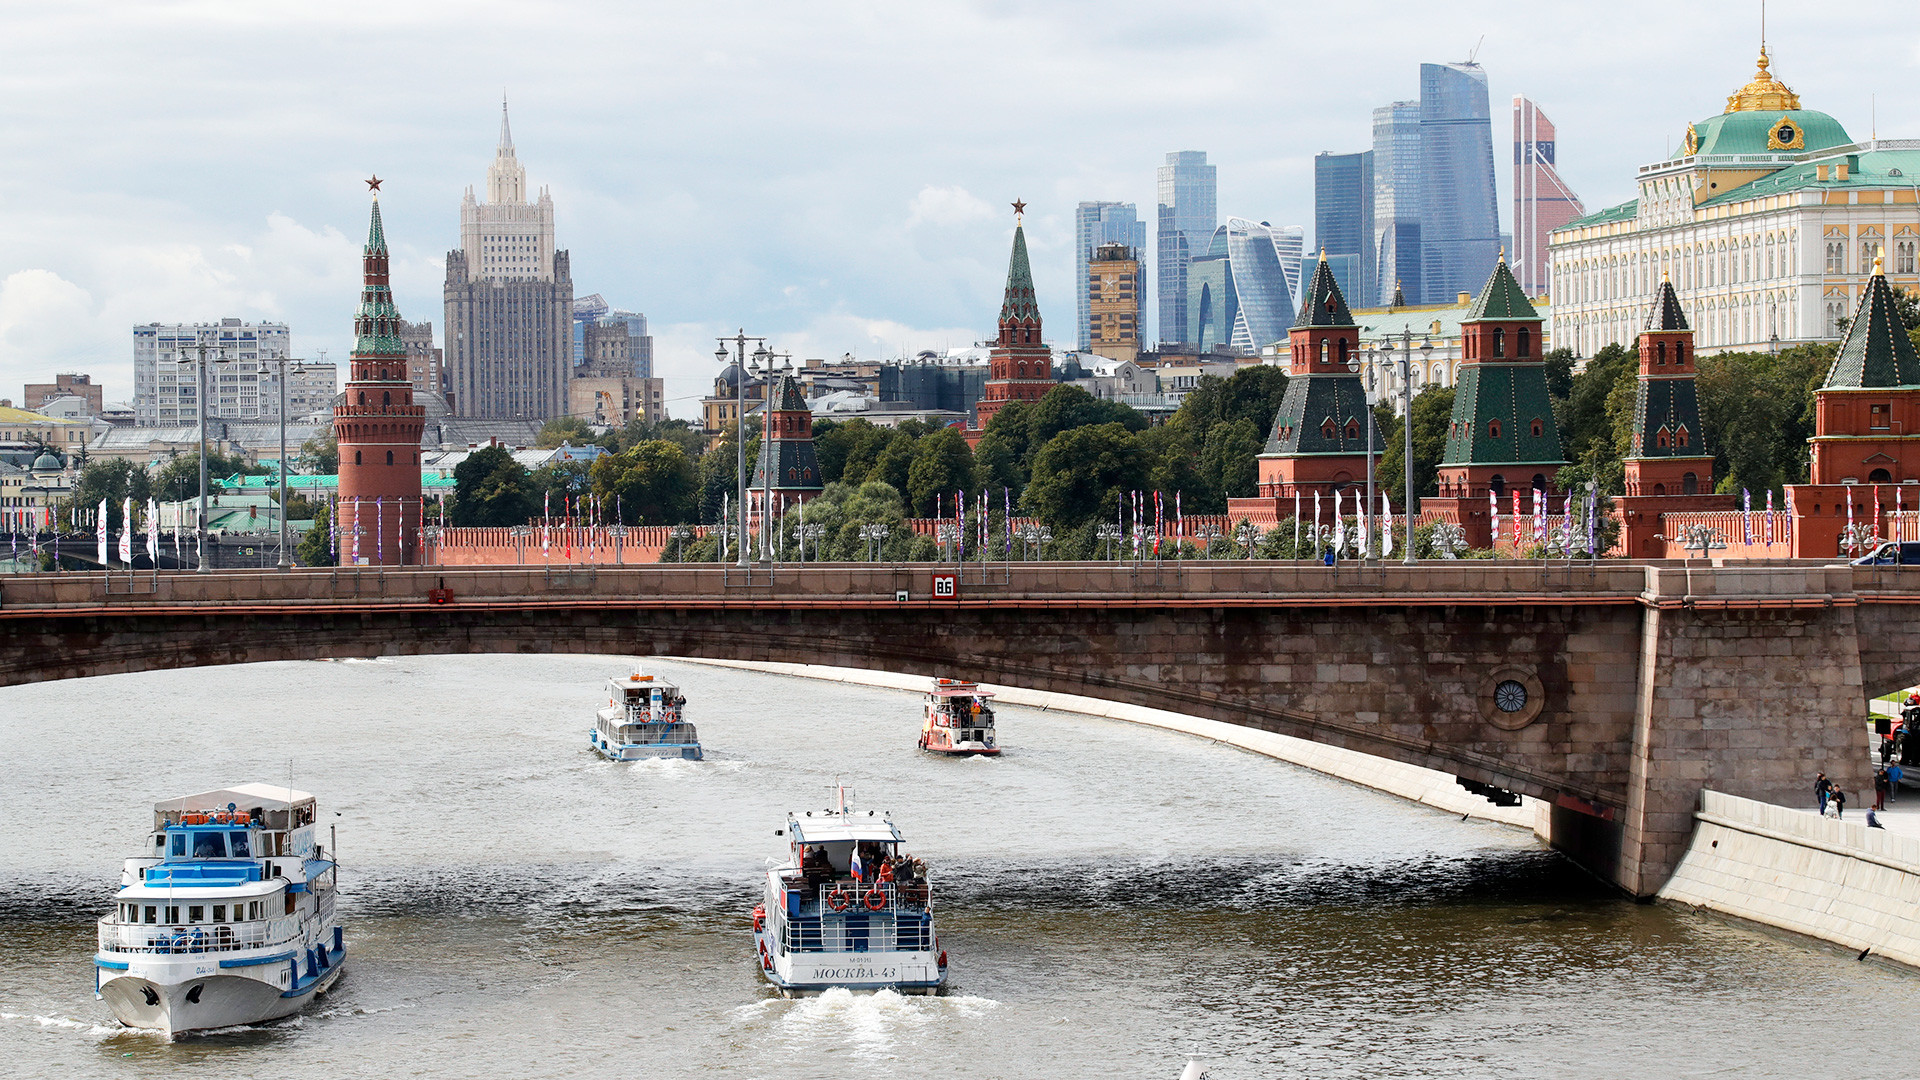 Pleasure boats making their way along the Moskva River.